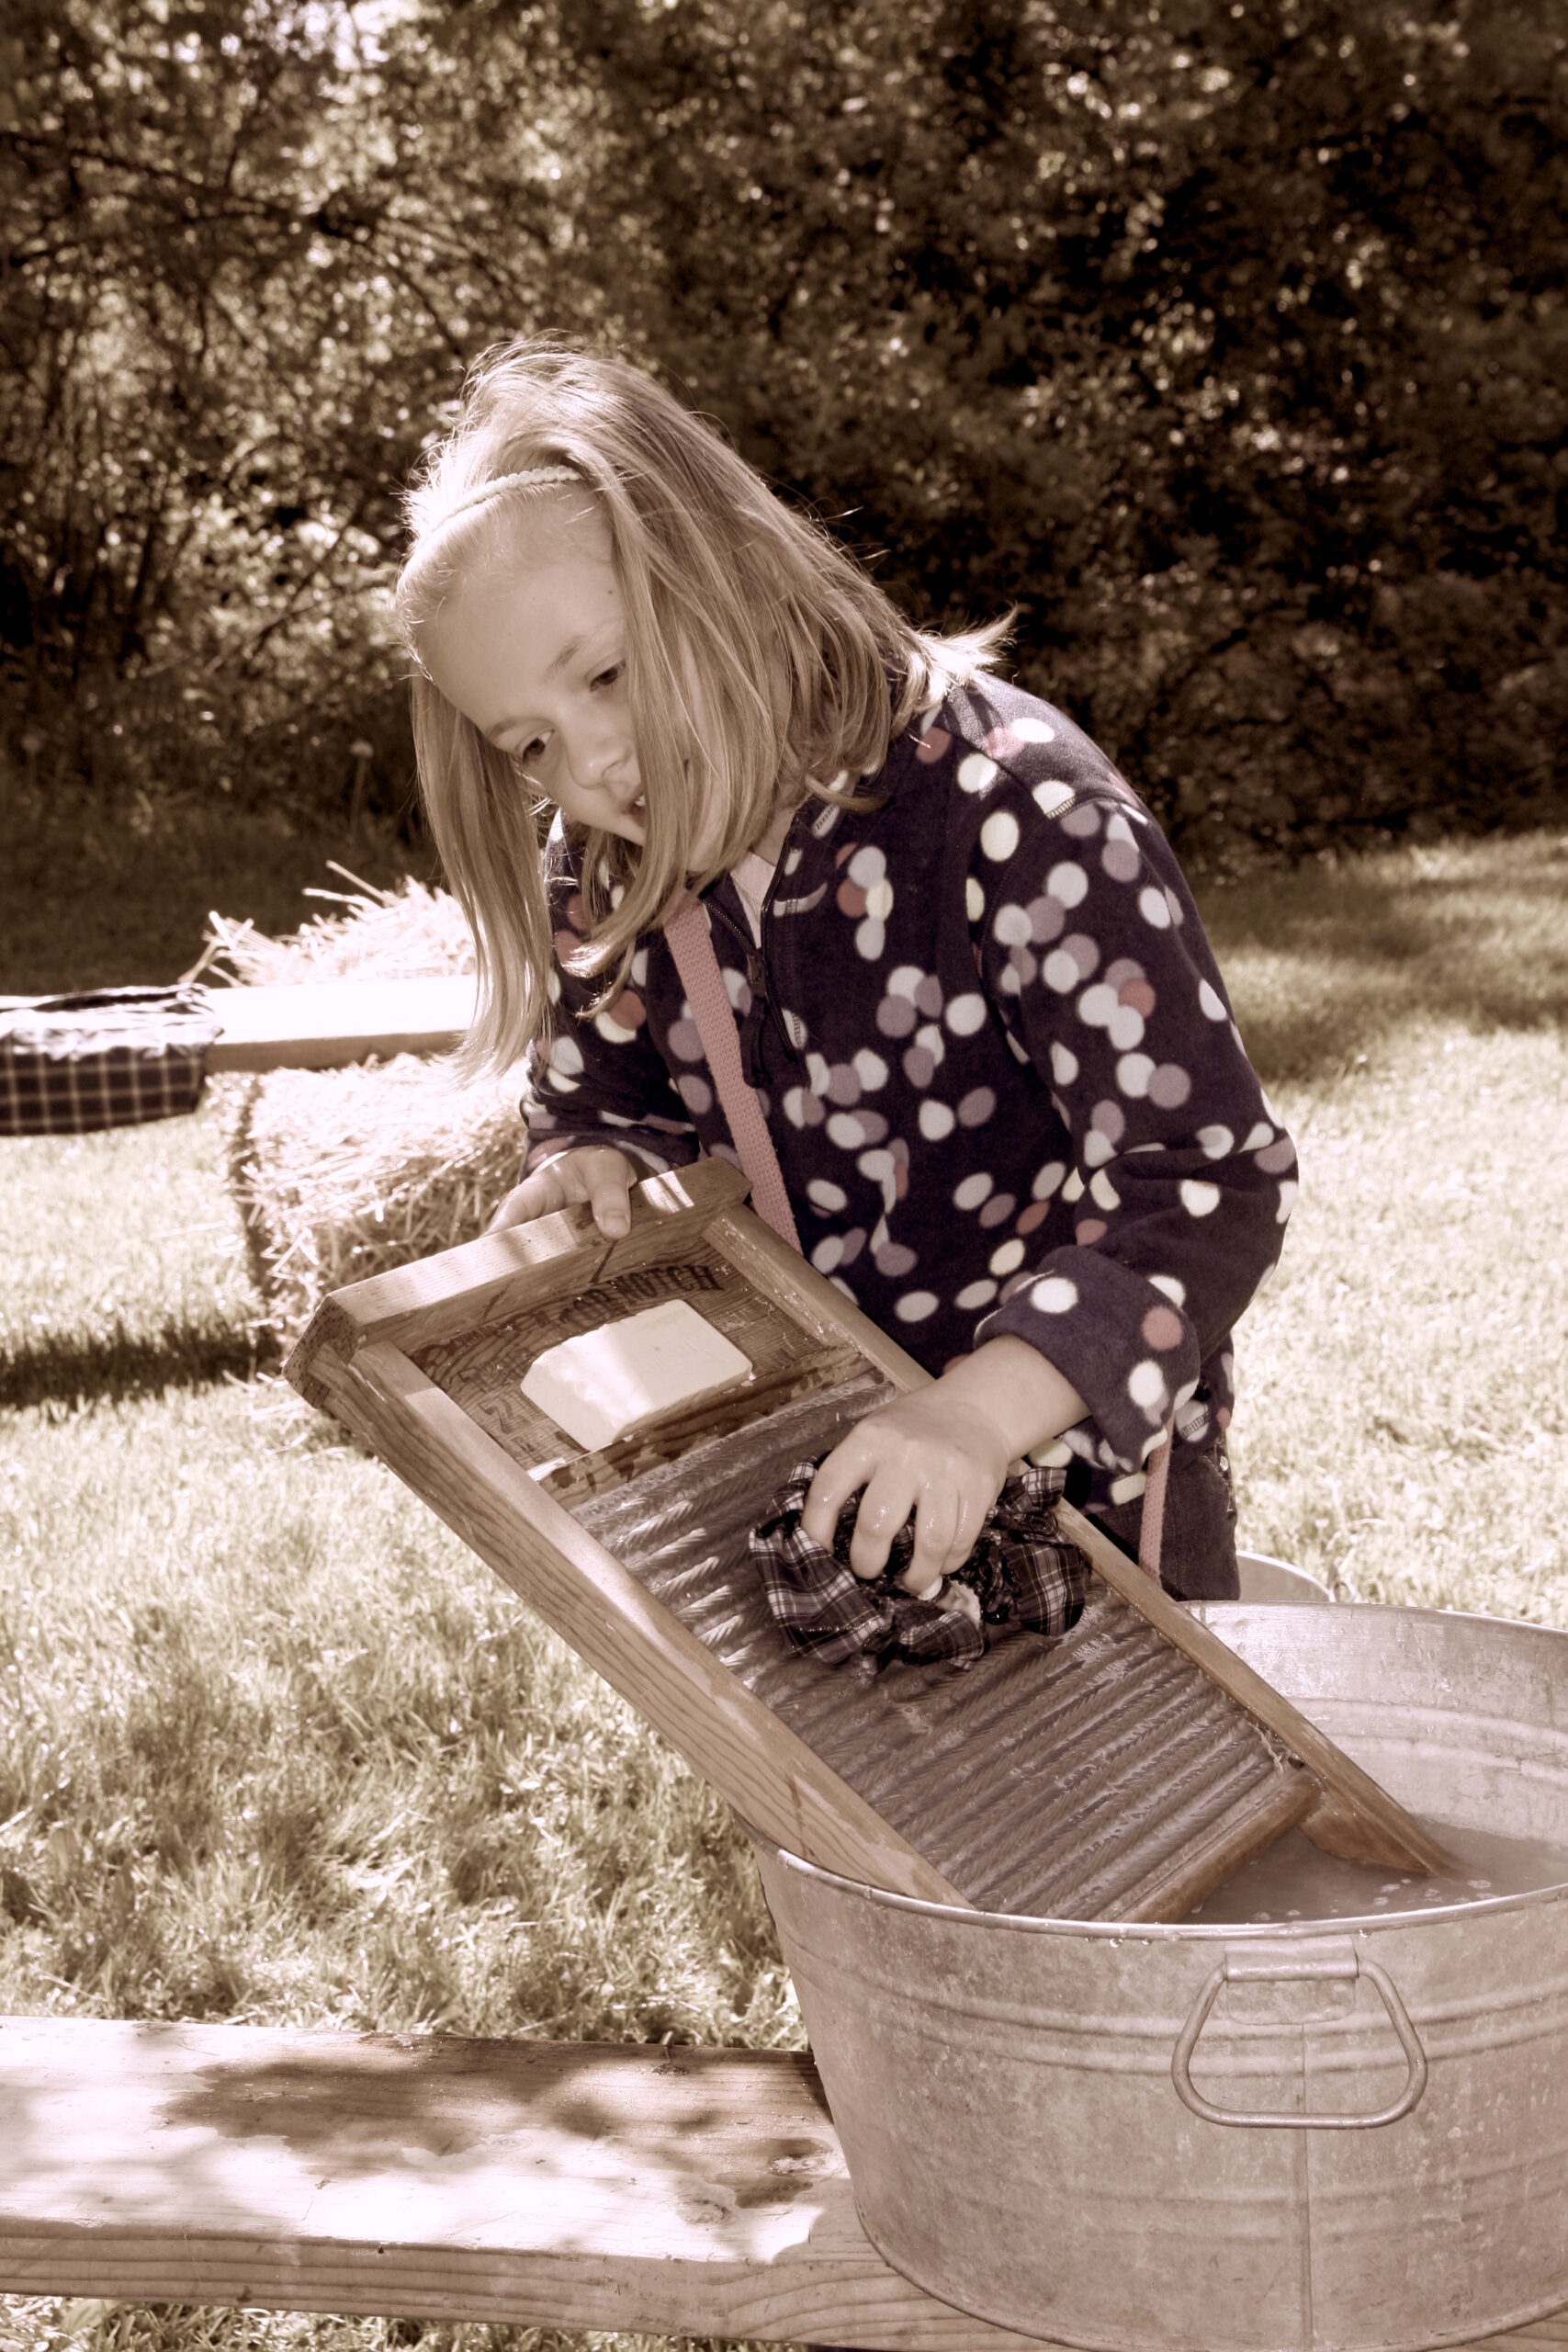 Child uses antique washboard at The Greater Rochester Heritage Days Festival